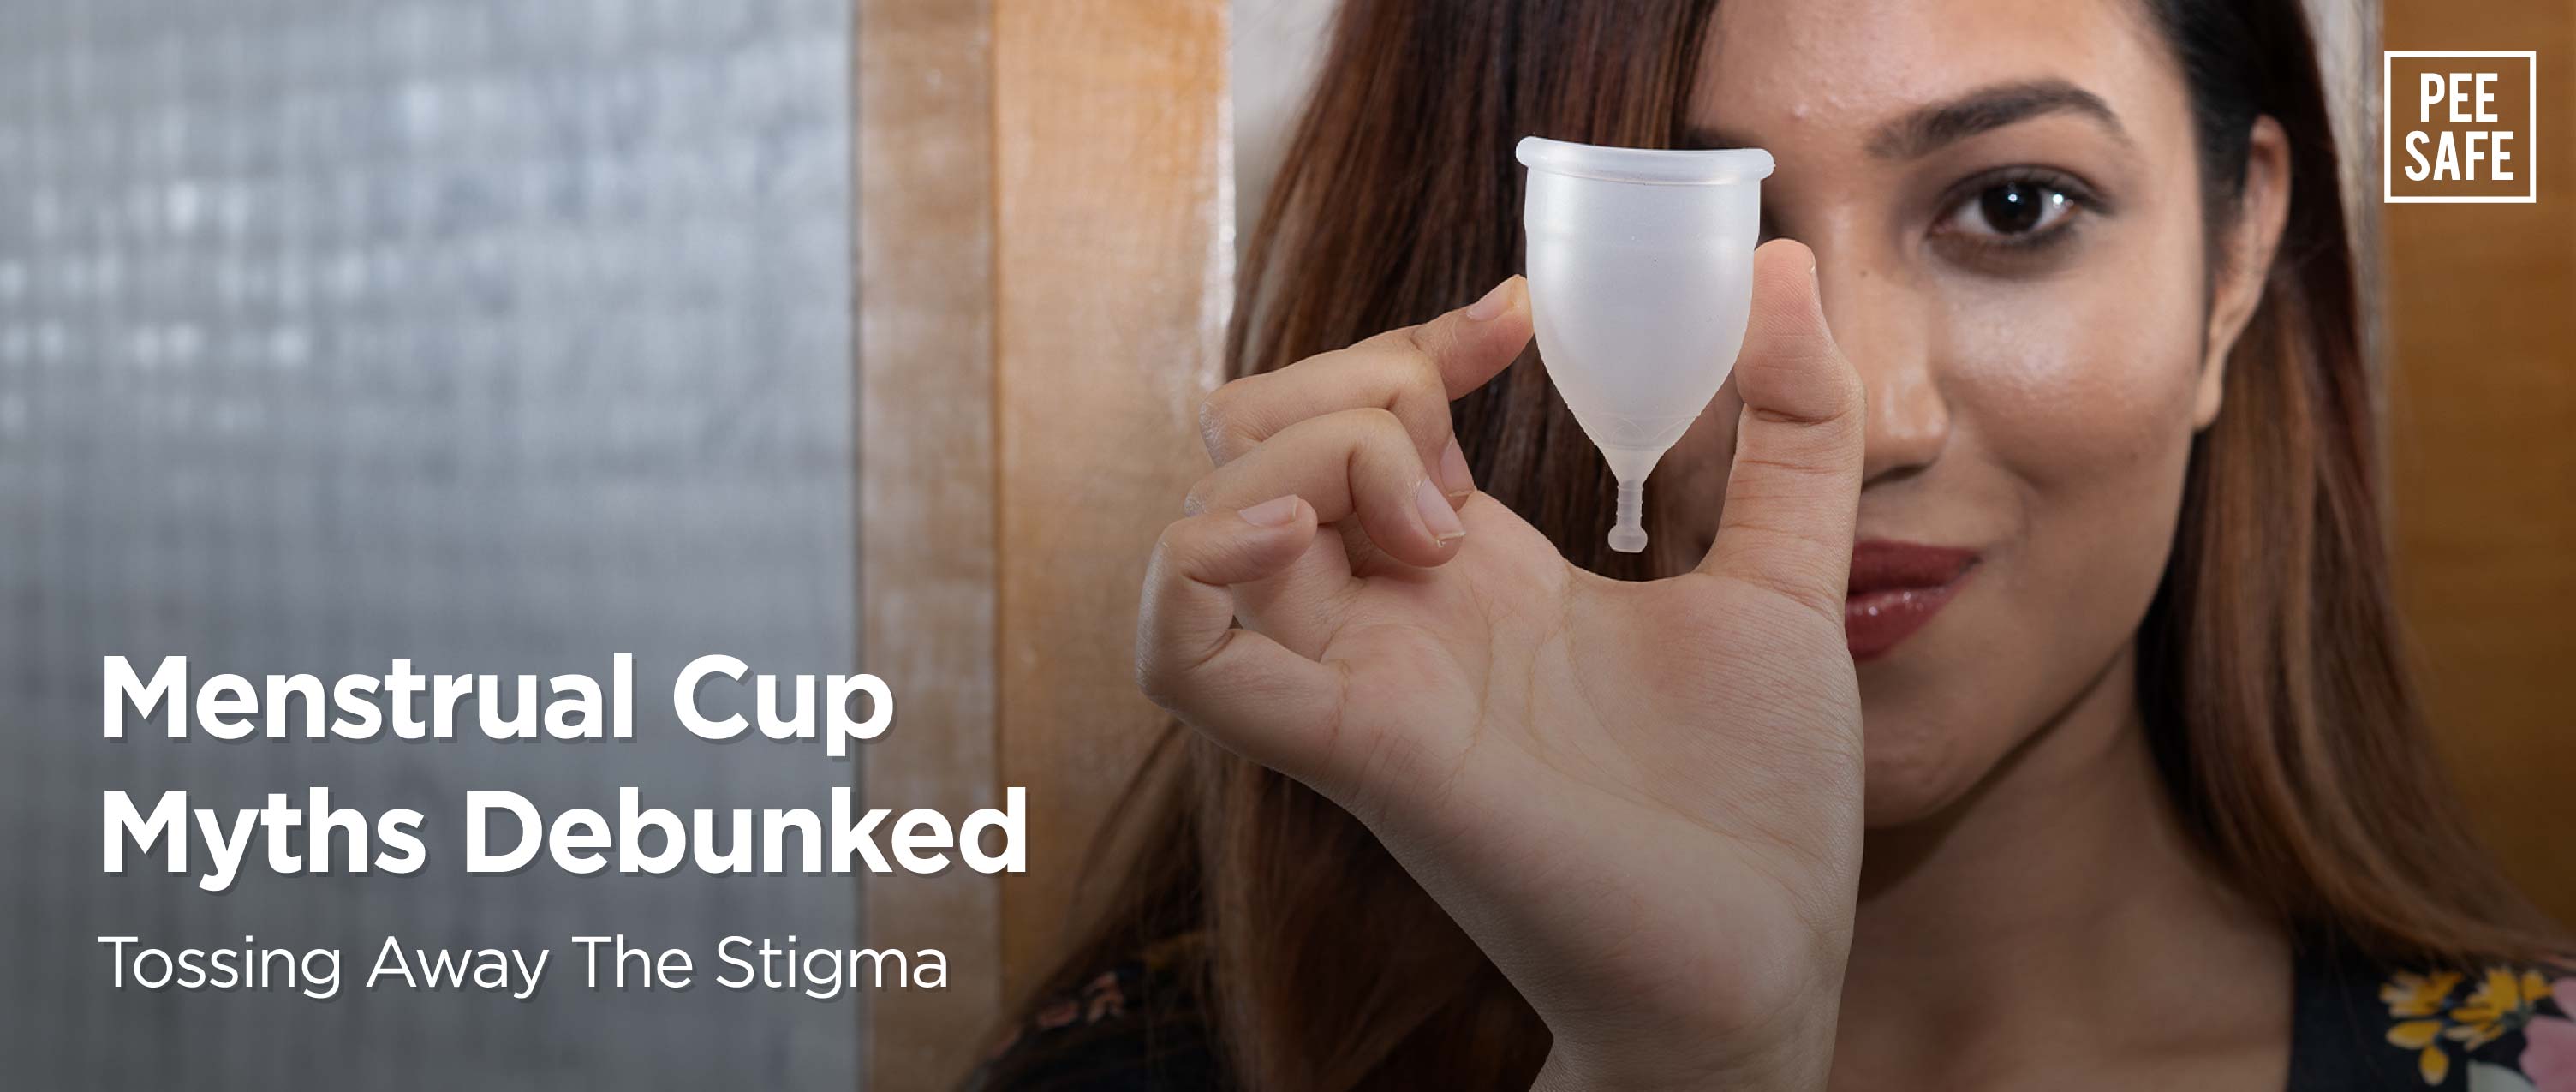 Menstrual Cup Myths Debunked: Tossing Away The Stigma